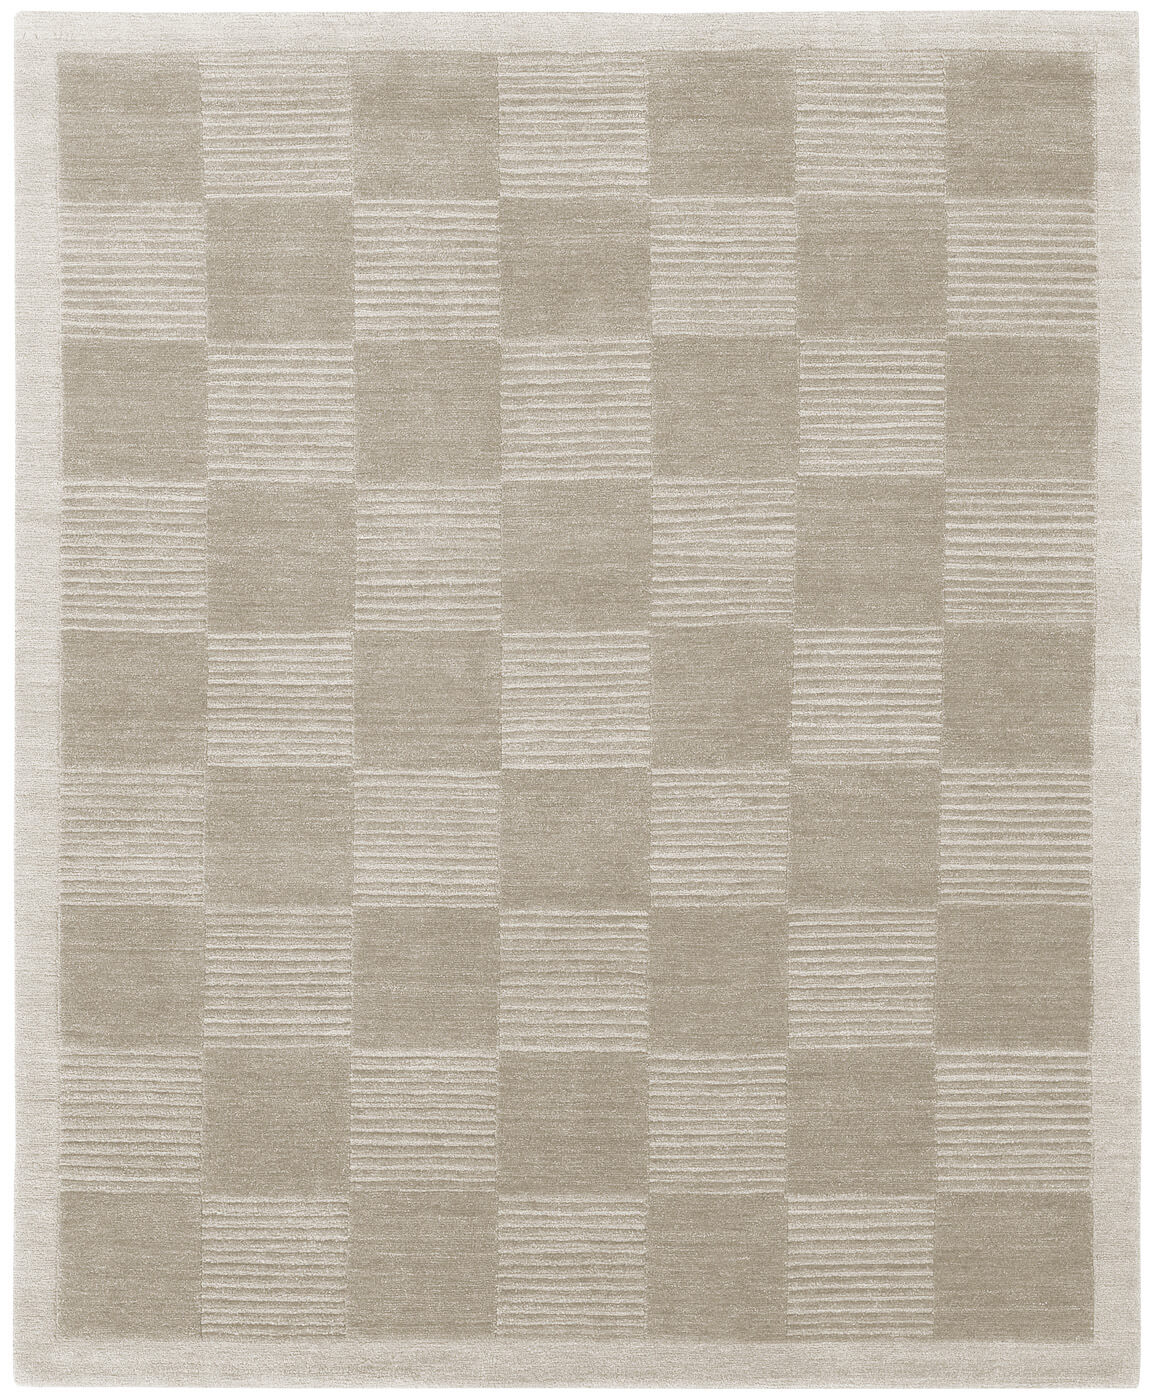 Boxes Hand-woven Luxury Rug ☞ Size: 300 x 400 cm